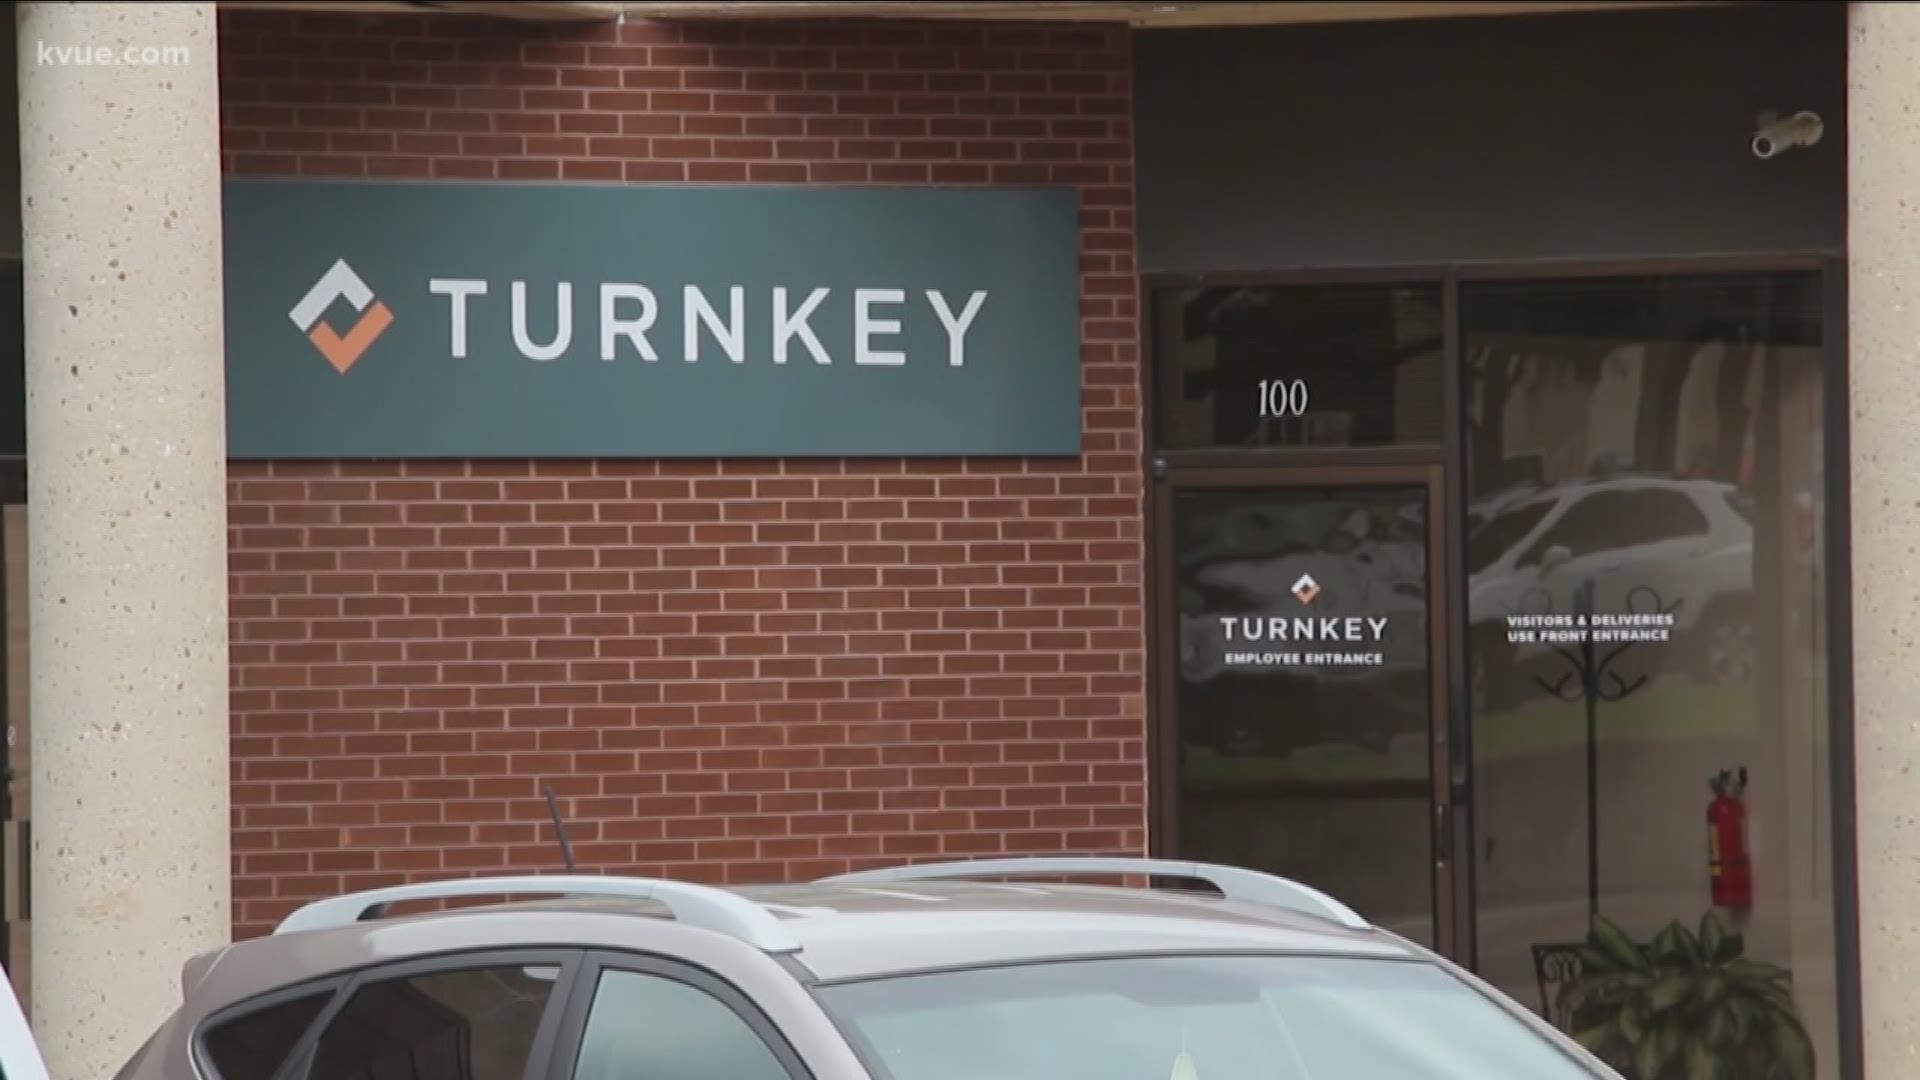 Austin-based TurnKey Vacation Rentals is refusing to give refunds to customers unable to travel because of the pandemic.